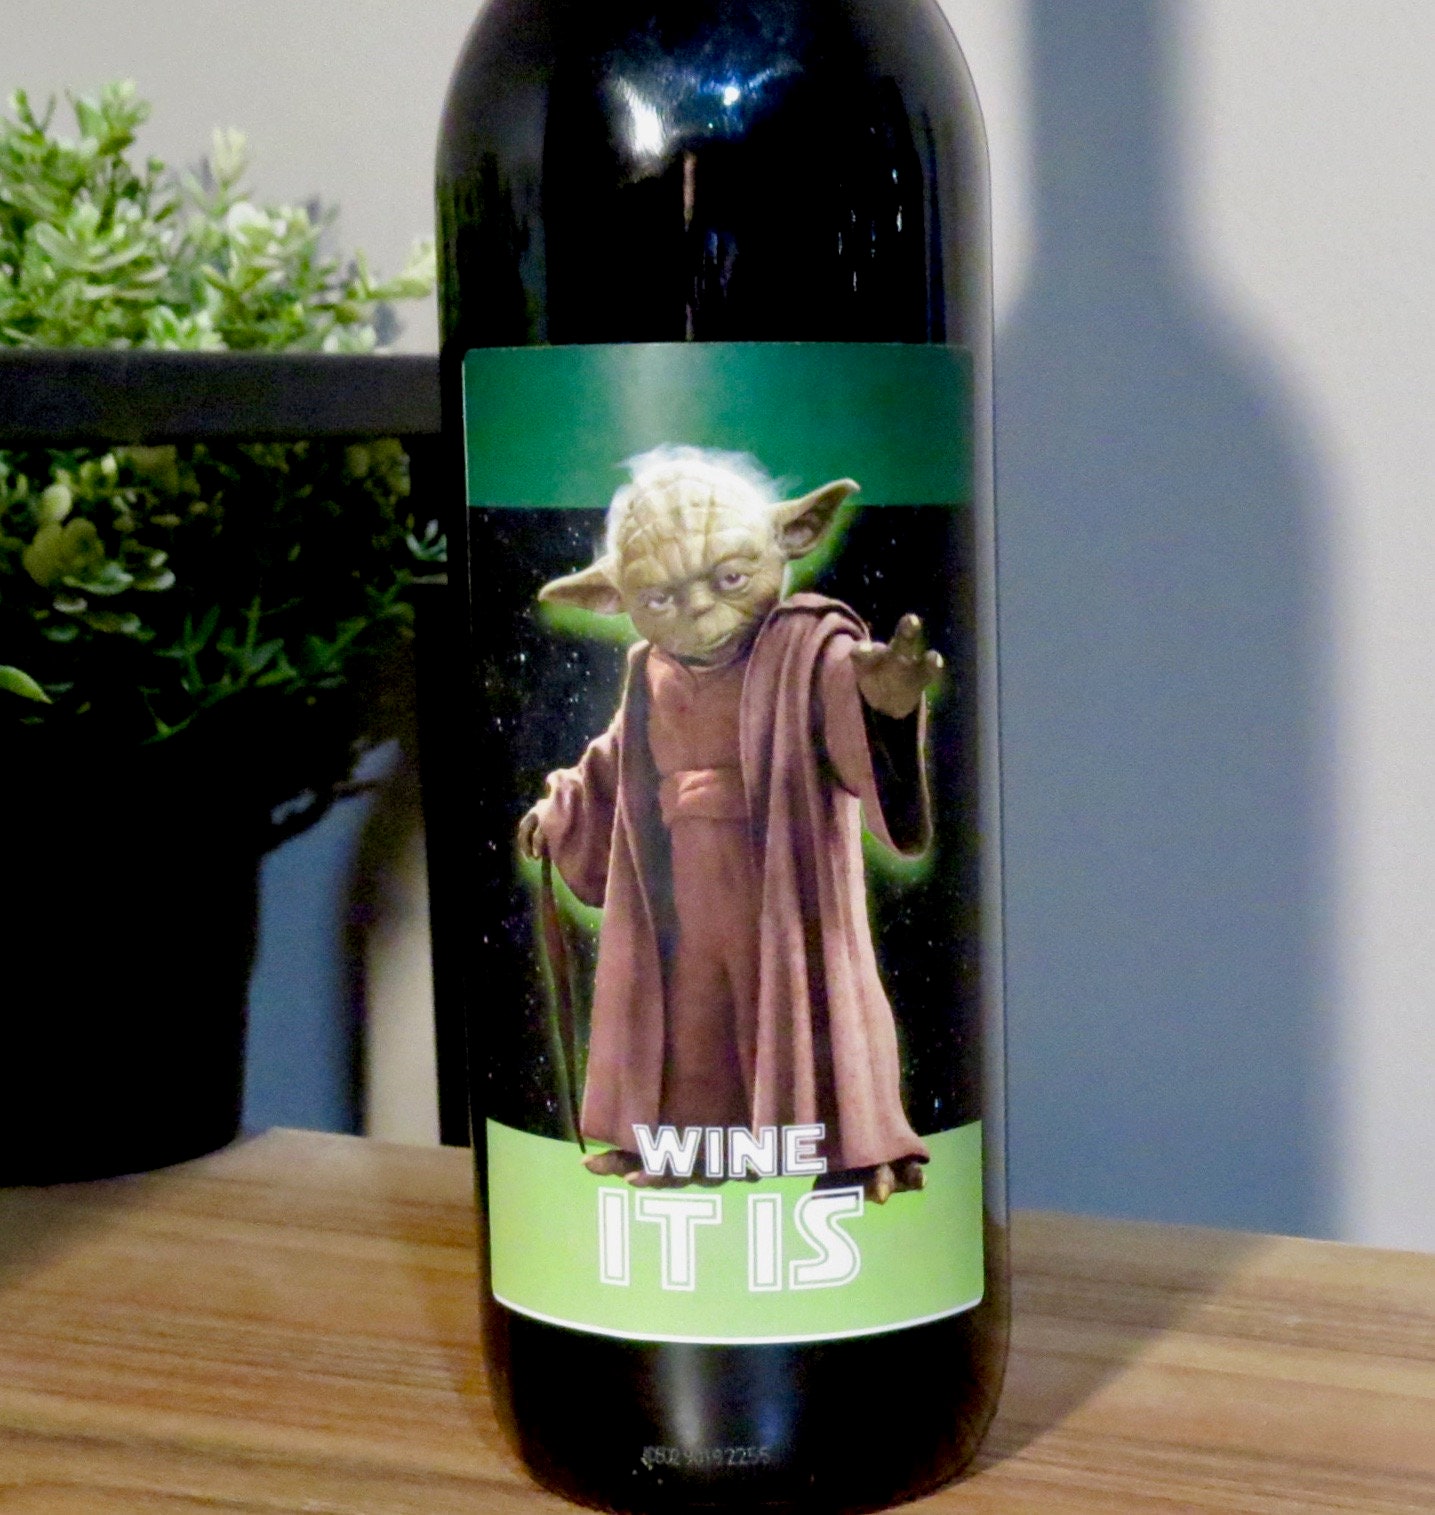 Made for my Star Wars geek son! Made out of a wine bottle, used